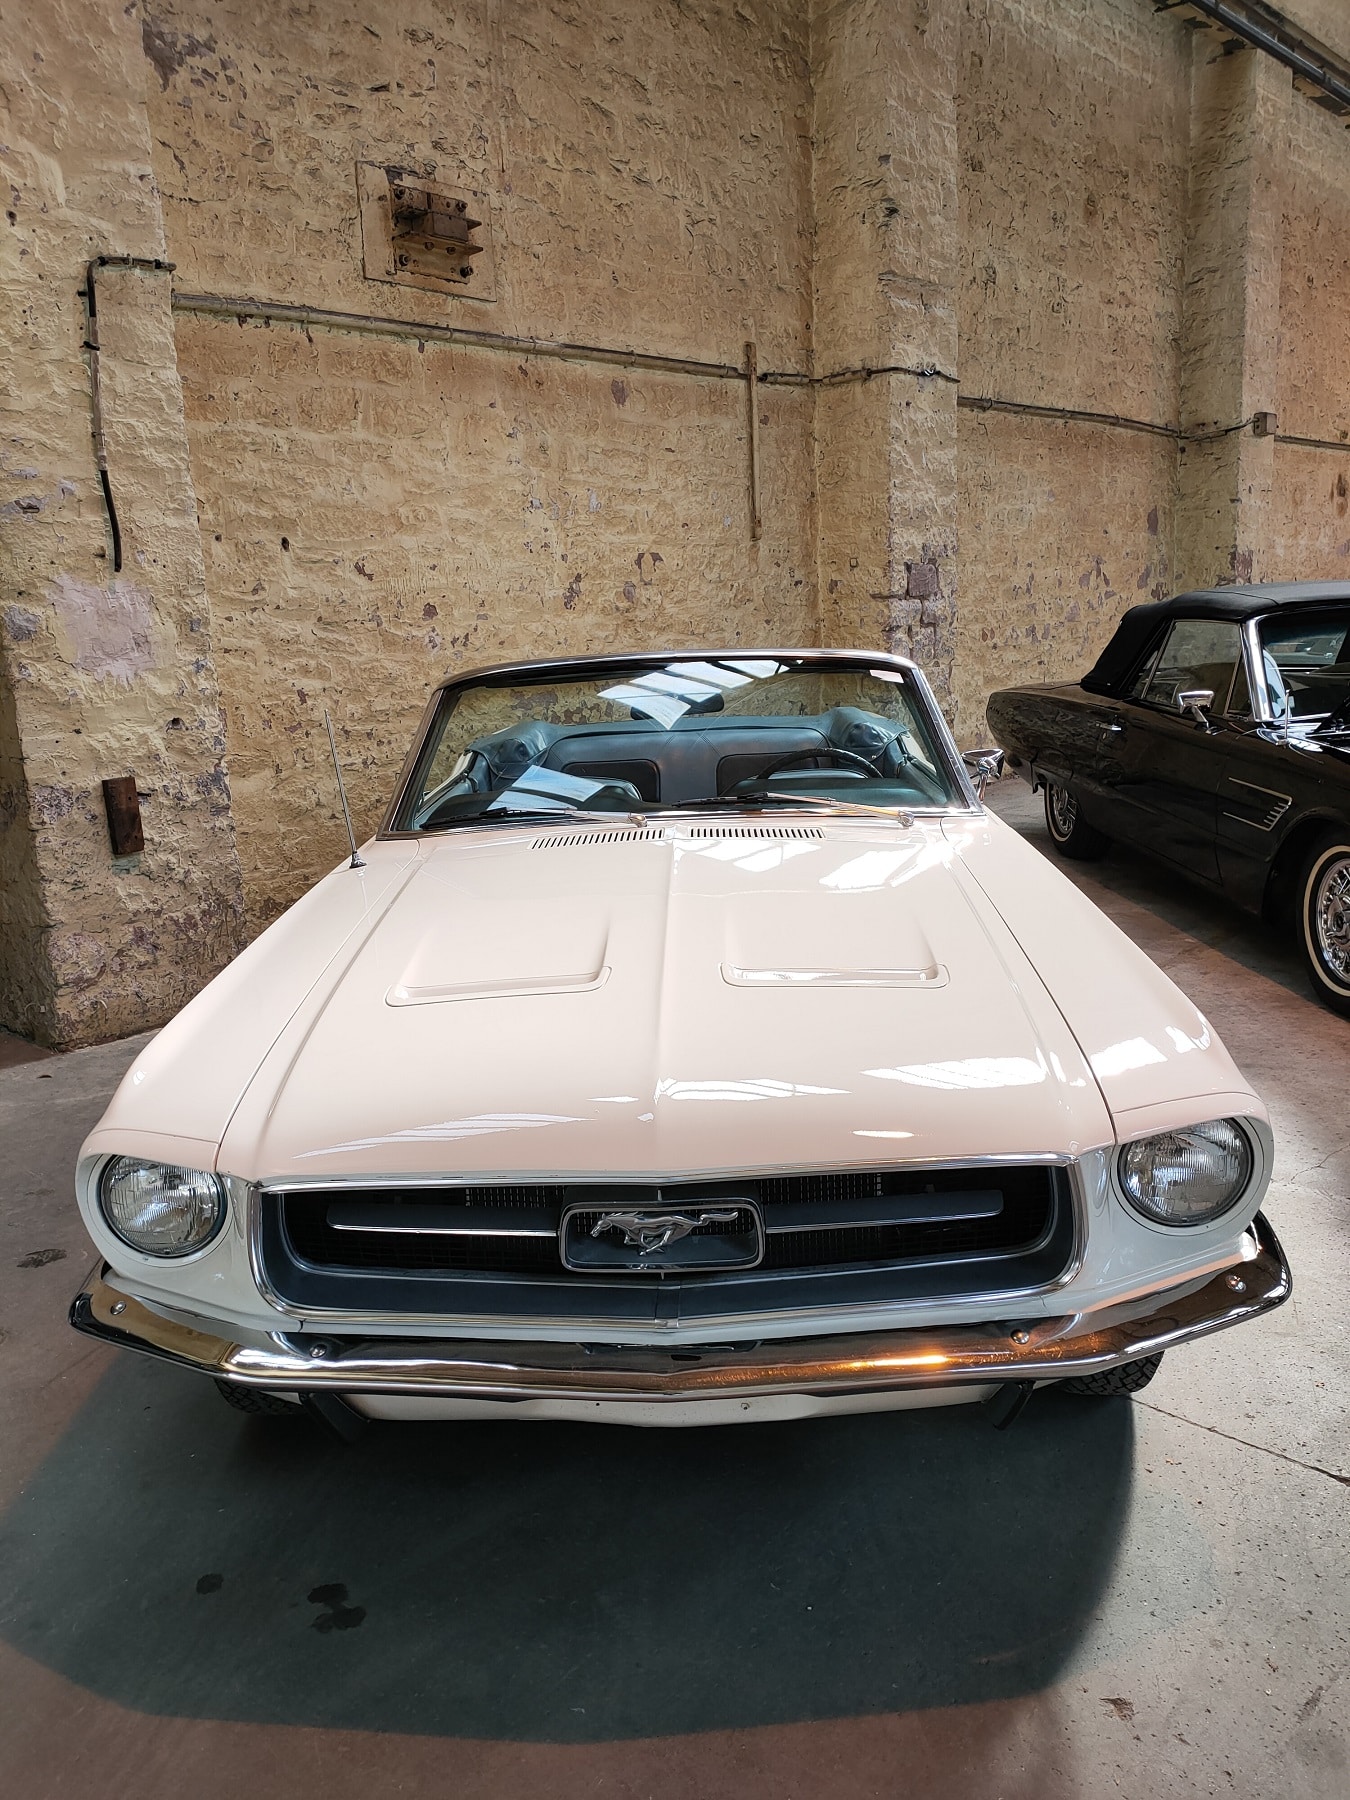 Ford Mustang 1965 V8 289ci  Achat & Prix - Voiture Collection - Sam's  Garage